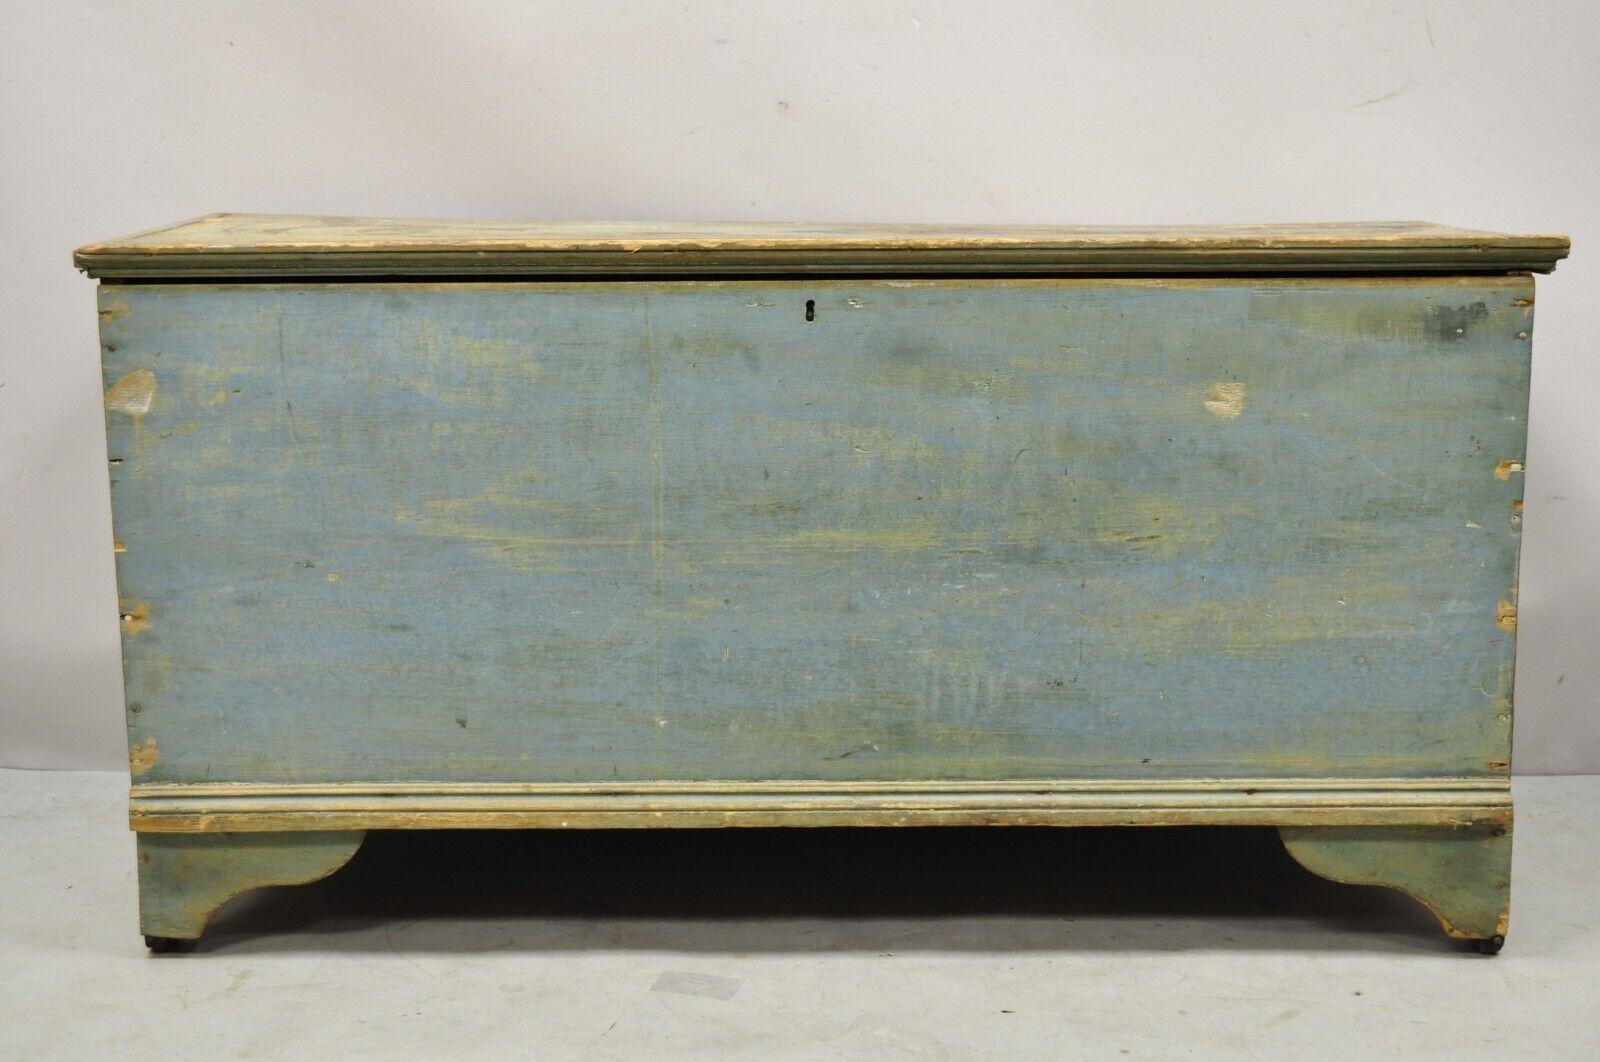 Antique 19th century blue green American Country Colonial Painted Blanket Chest Trunk. Item features solid wood construction, blue/green distressed finish, no key but unlocked, very nice antique item, quality American craftsmanship, great style and